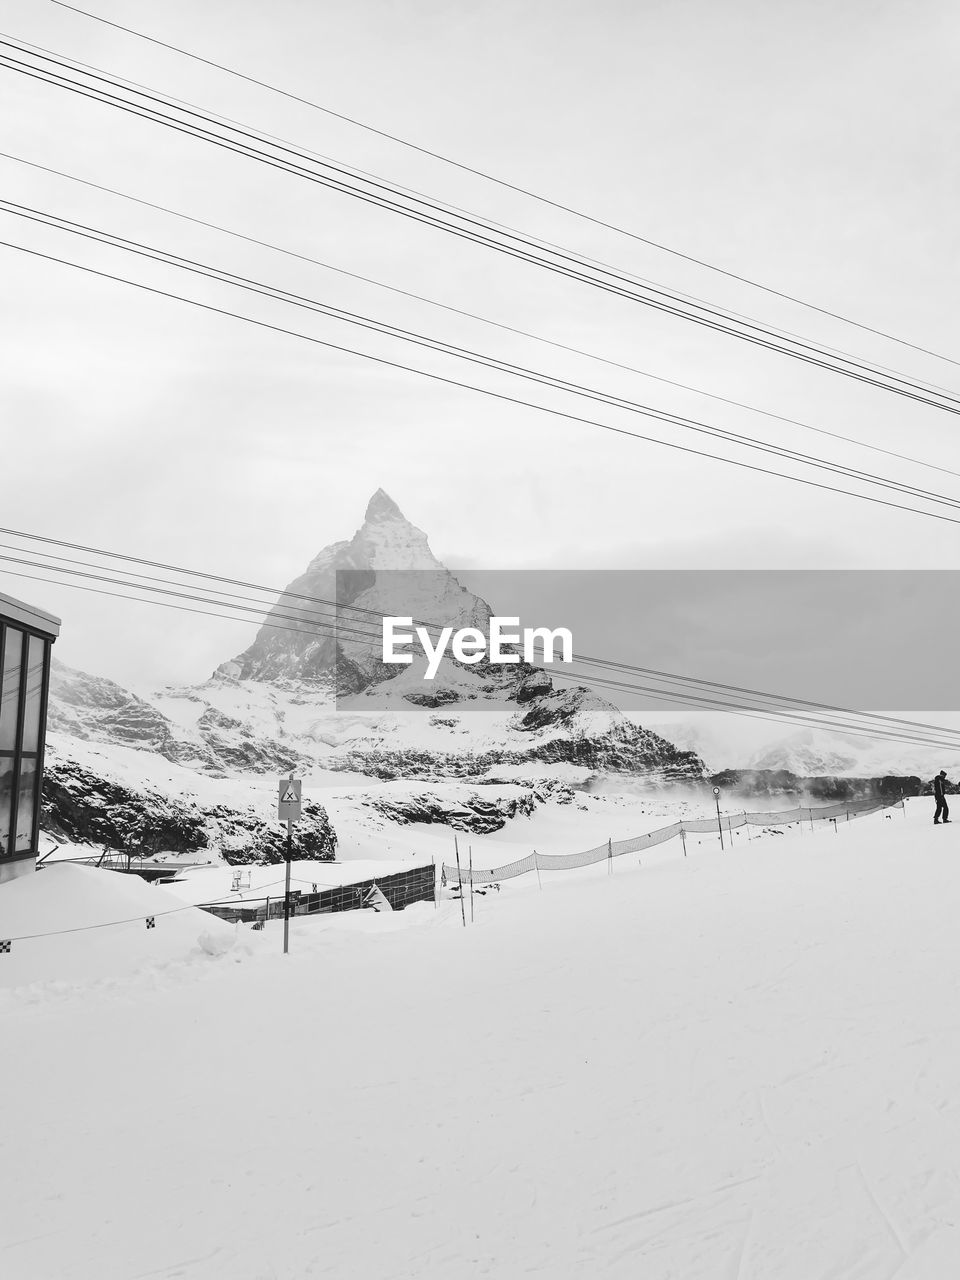 snow, cold temperature, winter, environment, cable, landscape, sky, nature, mountain, scenics - nature, electricity, beauty in nature, land, power line, day, travel destinations, travel, architecture, snowcapped mountain, no people, black and white, tranquil scene, tranquility, monochrome, outdoors, cloud, mountain range, non-urban scene, built structure, frozen, white, electricity pylon, transportation, tourism, monochrome photography